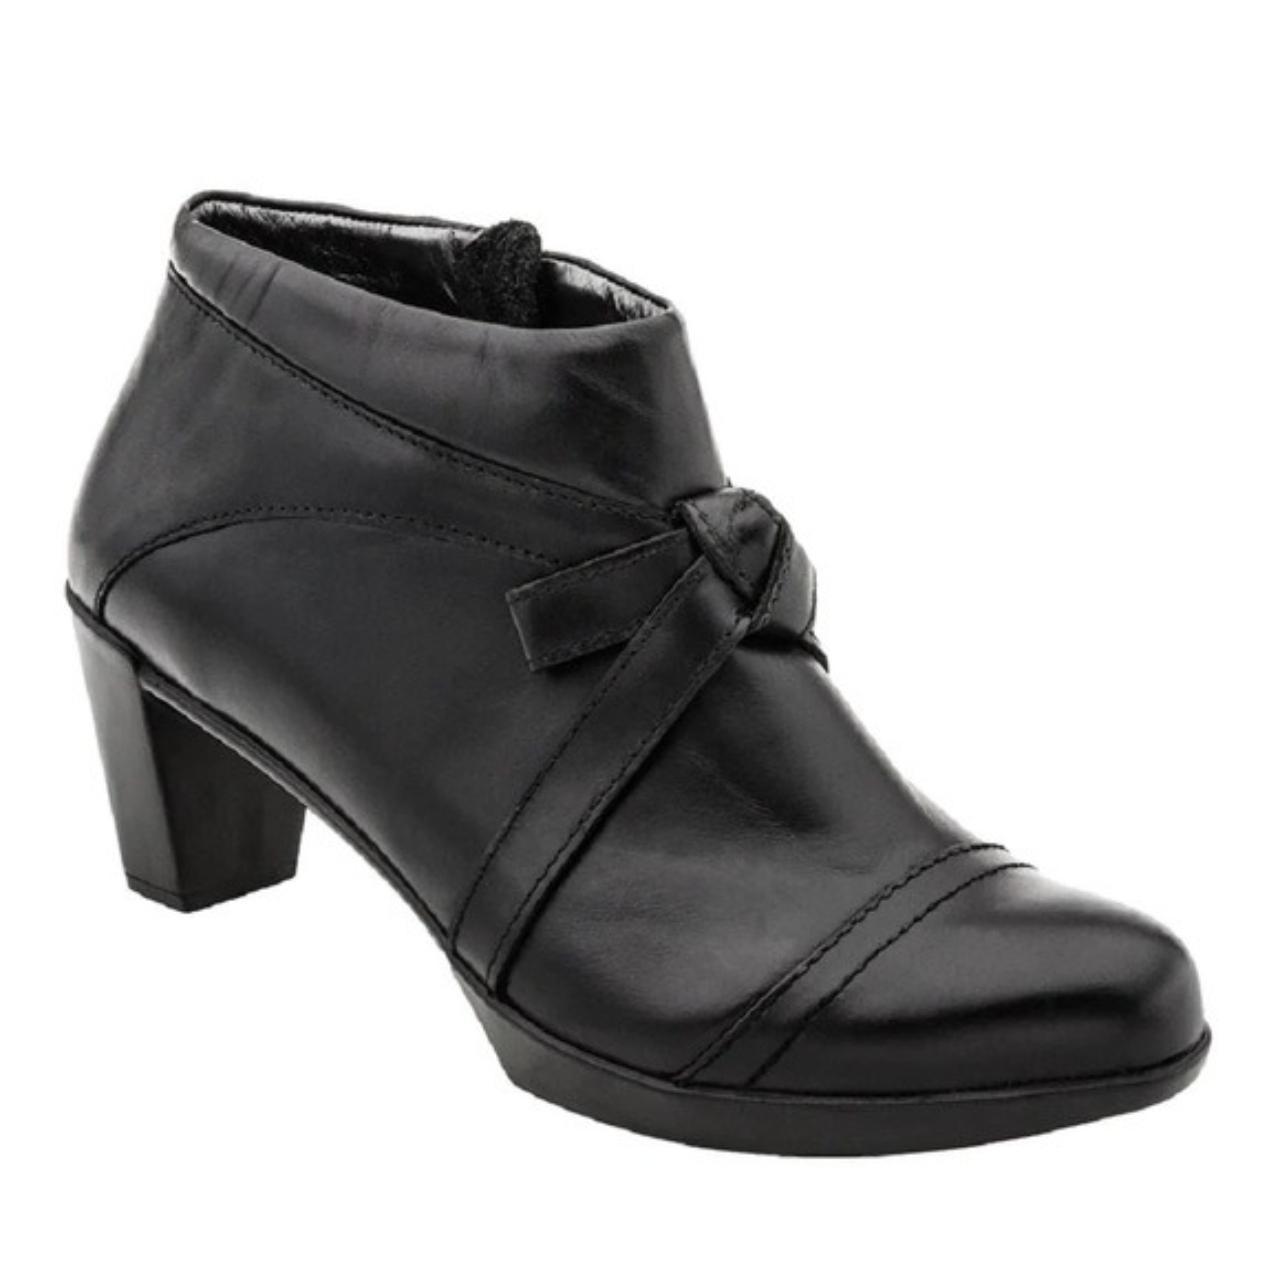 Naot Vistoso Women's Knotted Leather Ankle Black... - Depop